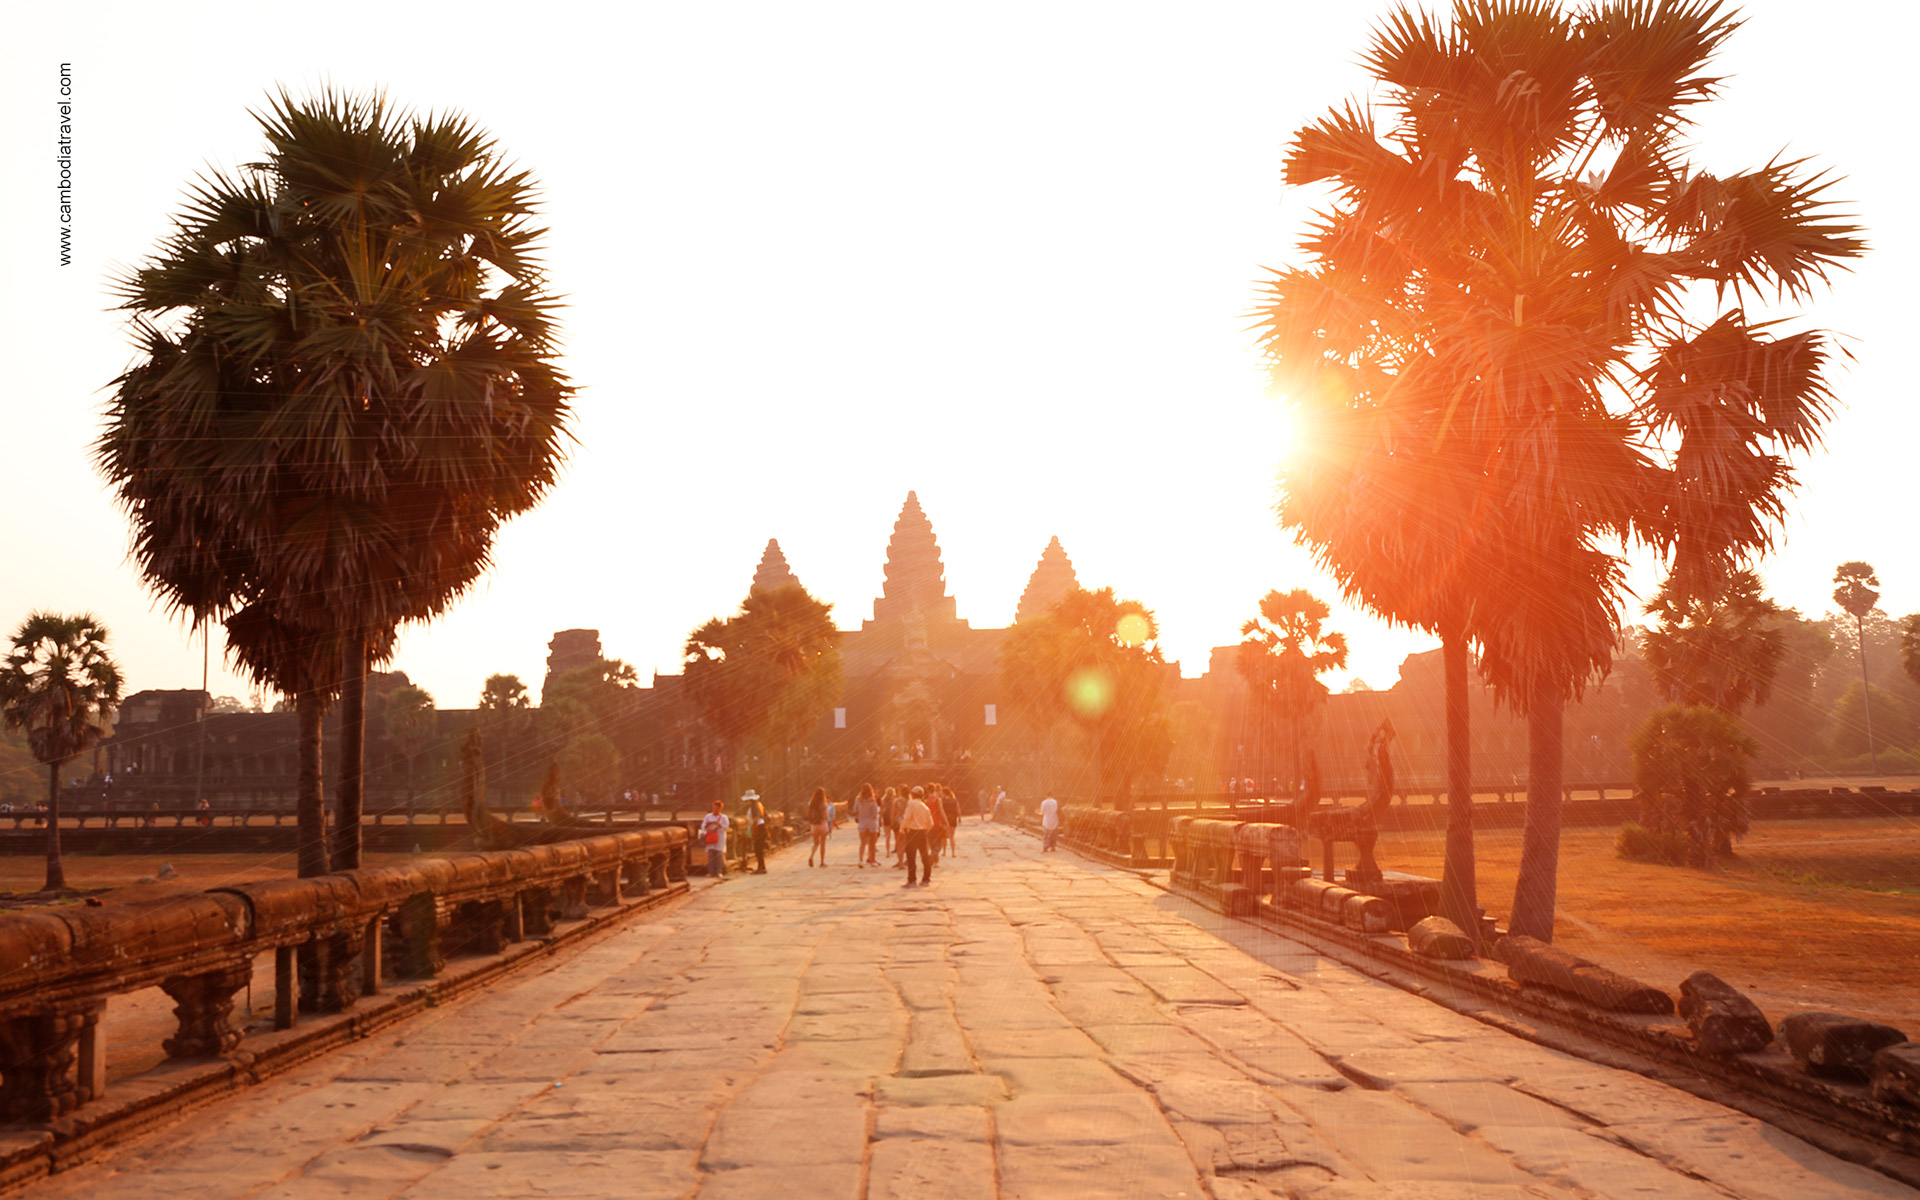 A photo of an ancient temple in Siem Reap, Cambodia in January